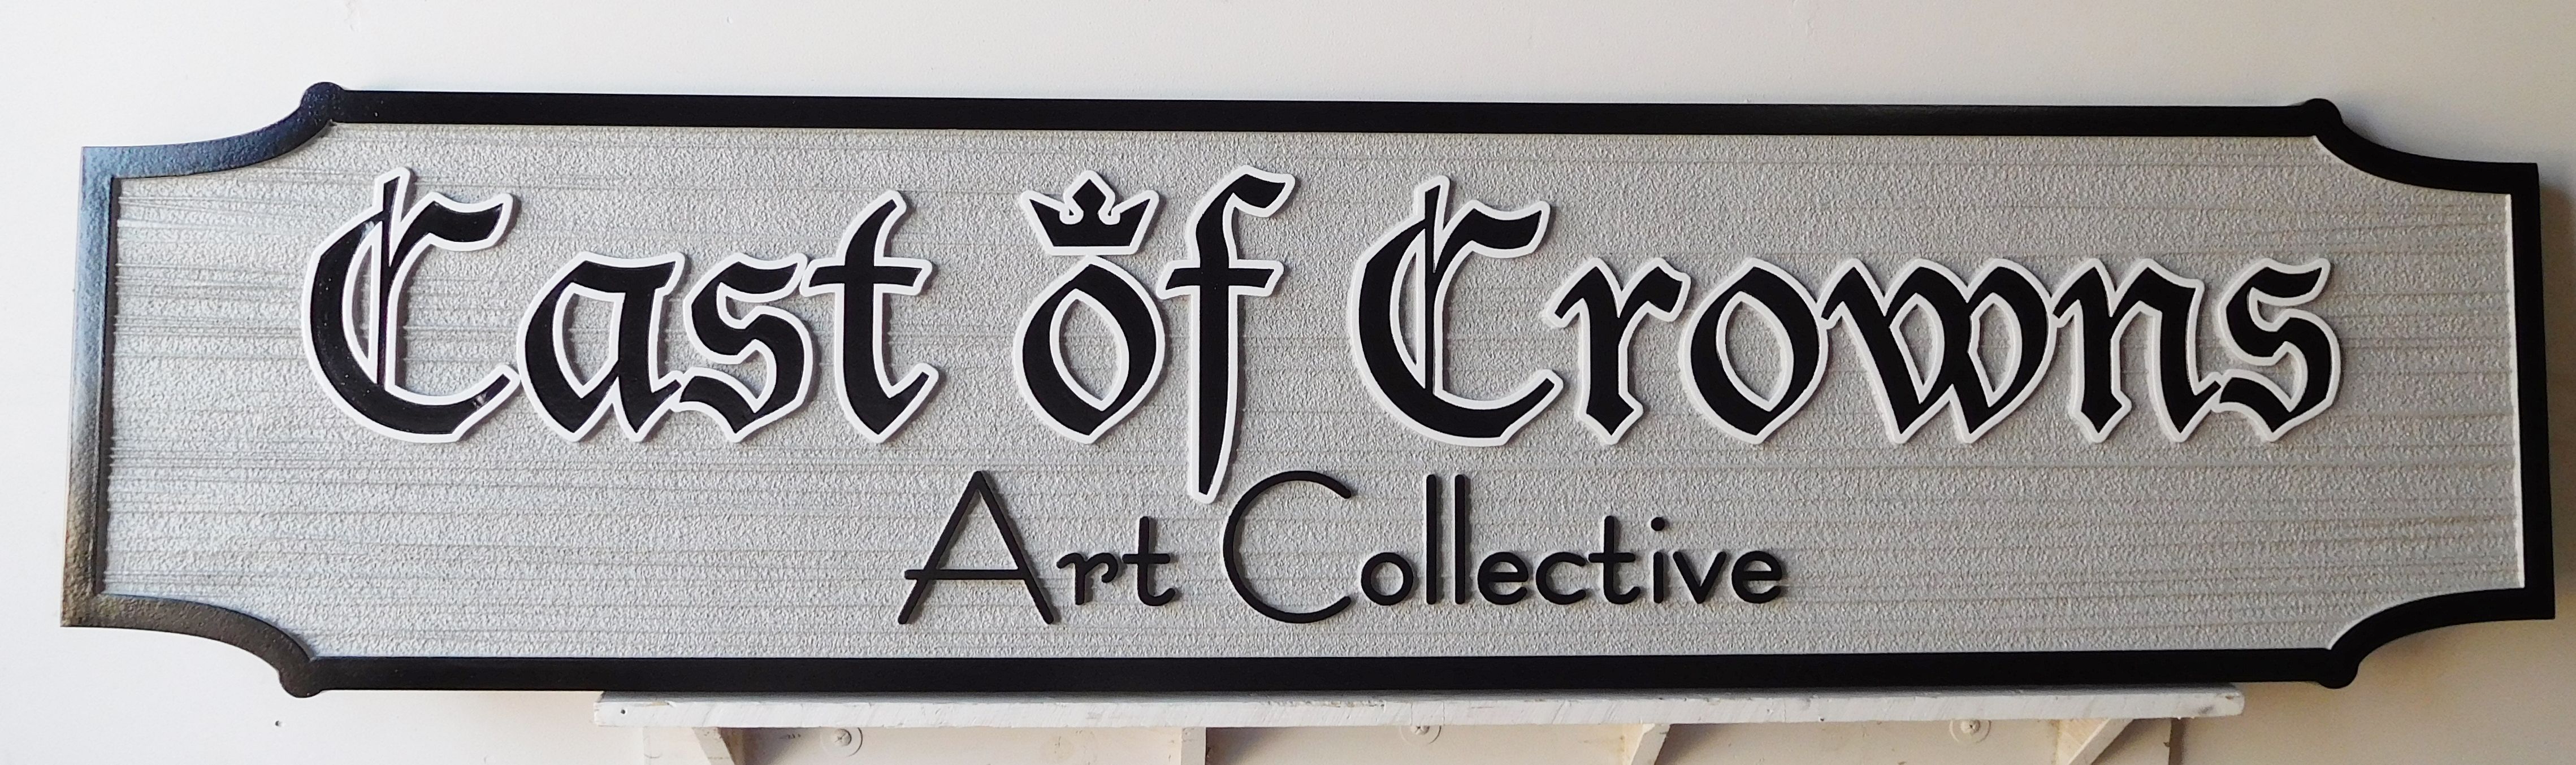 SA28424 -  Carved and Sandblasted HDU Sign for the "Cast of Crowns Art Collective"